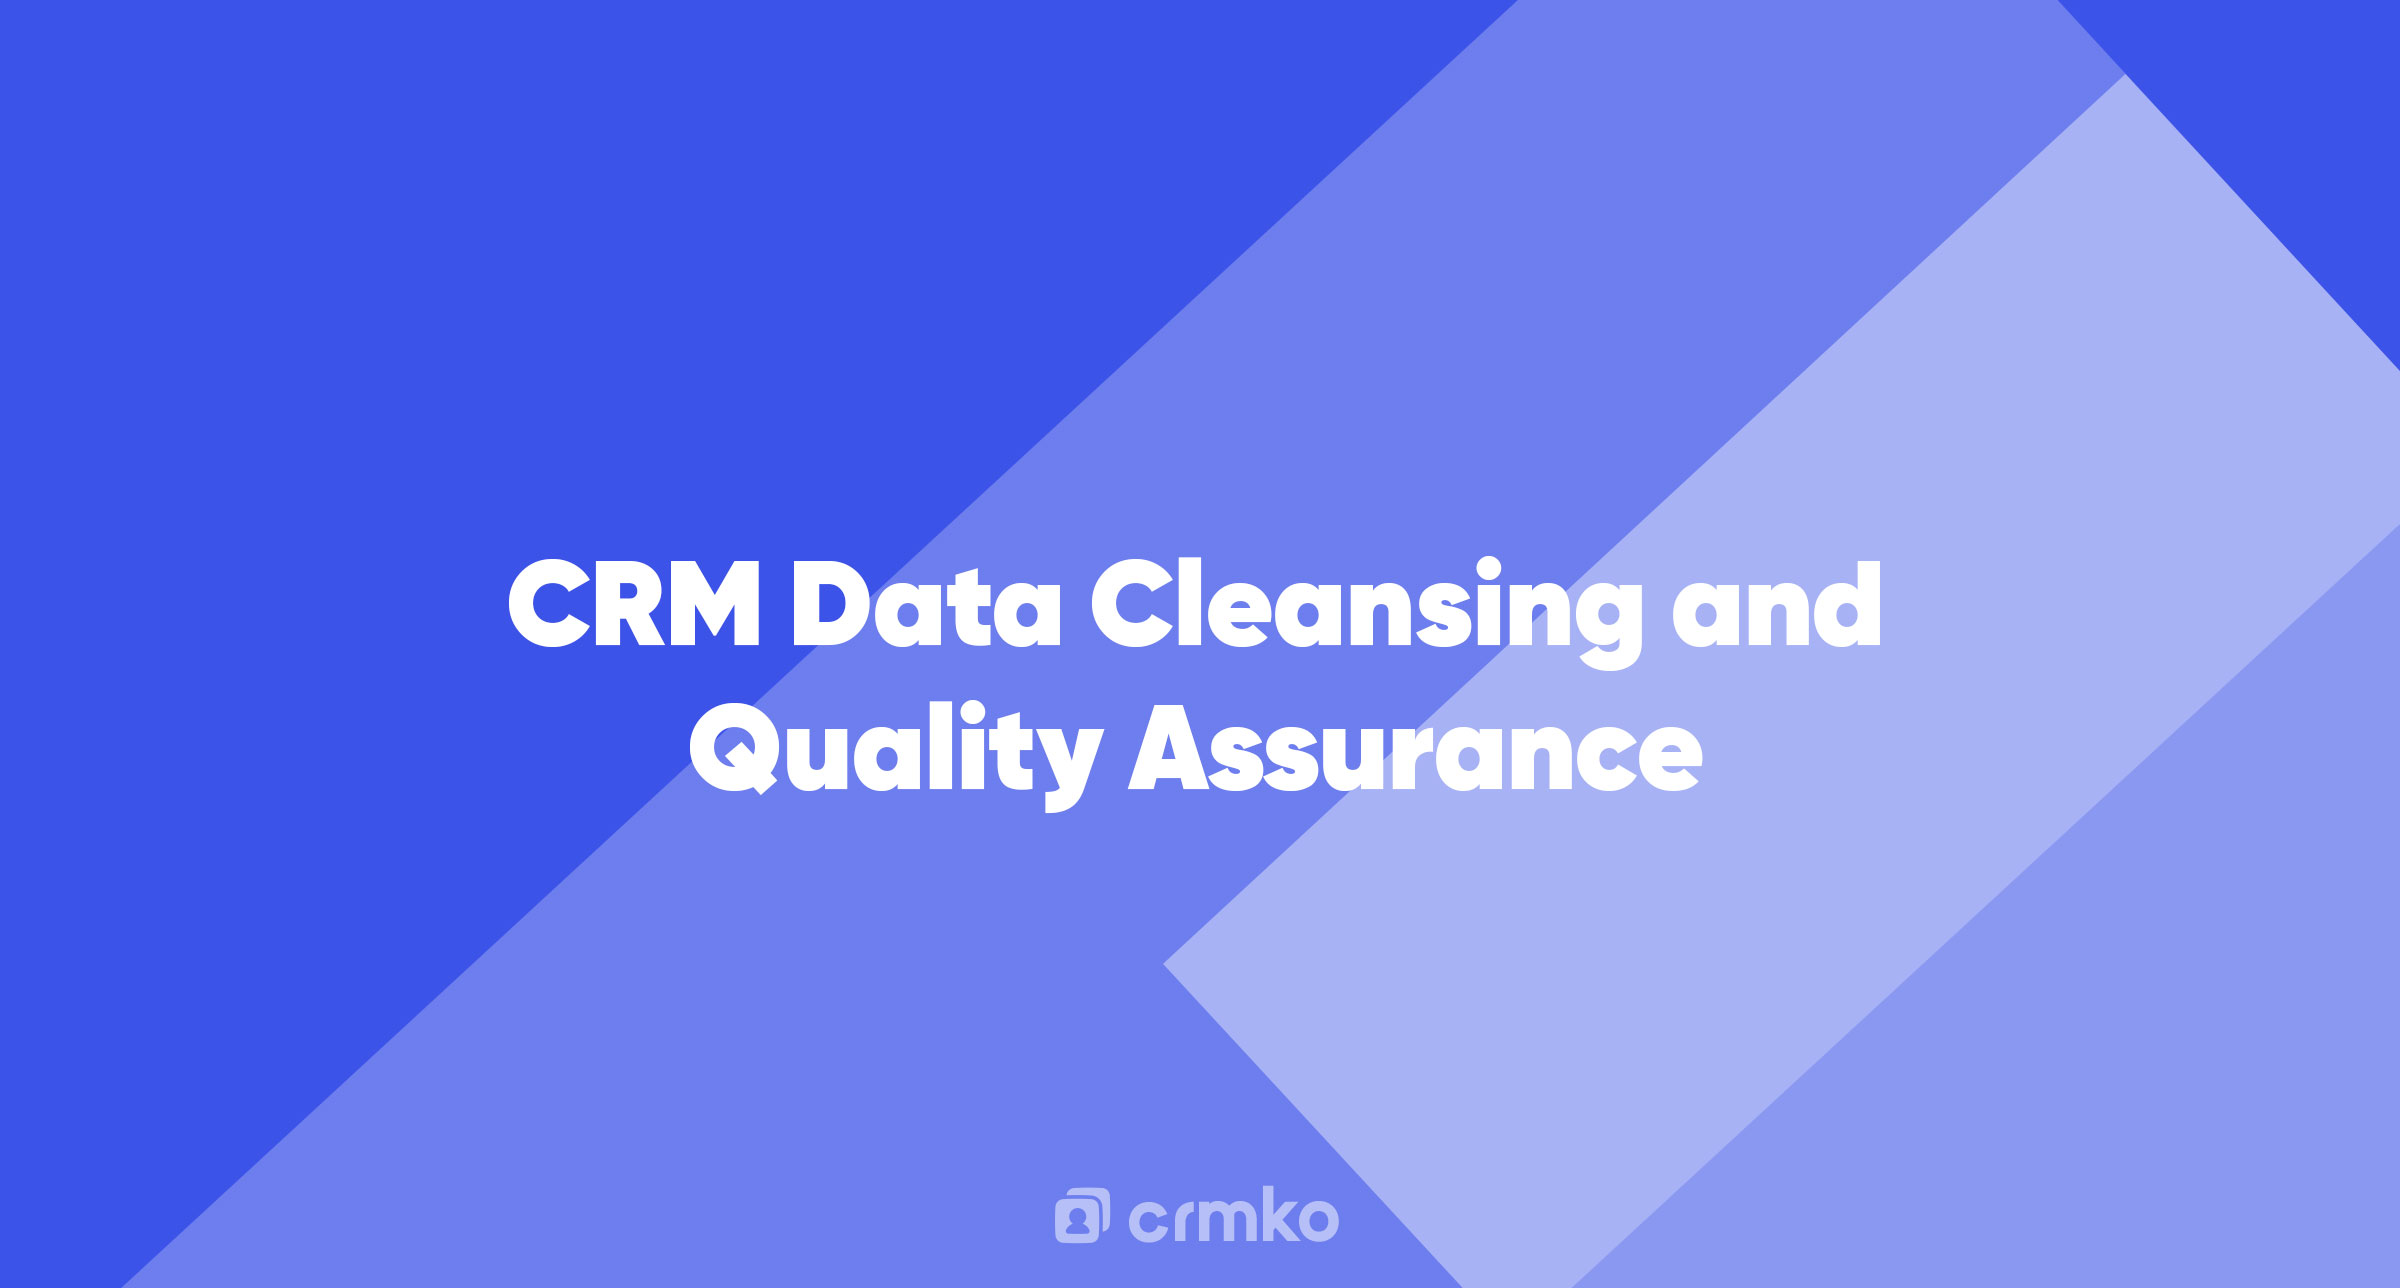 Article | CRM Data Cleansing and Quality Assurance